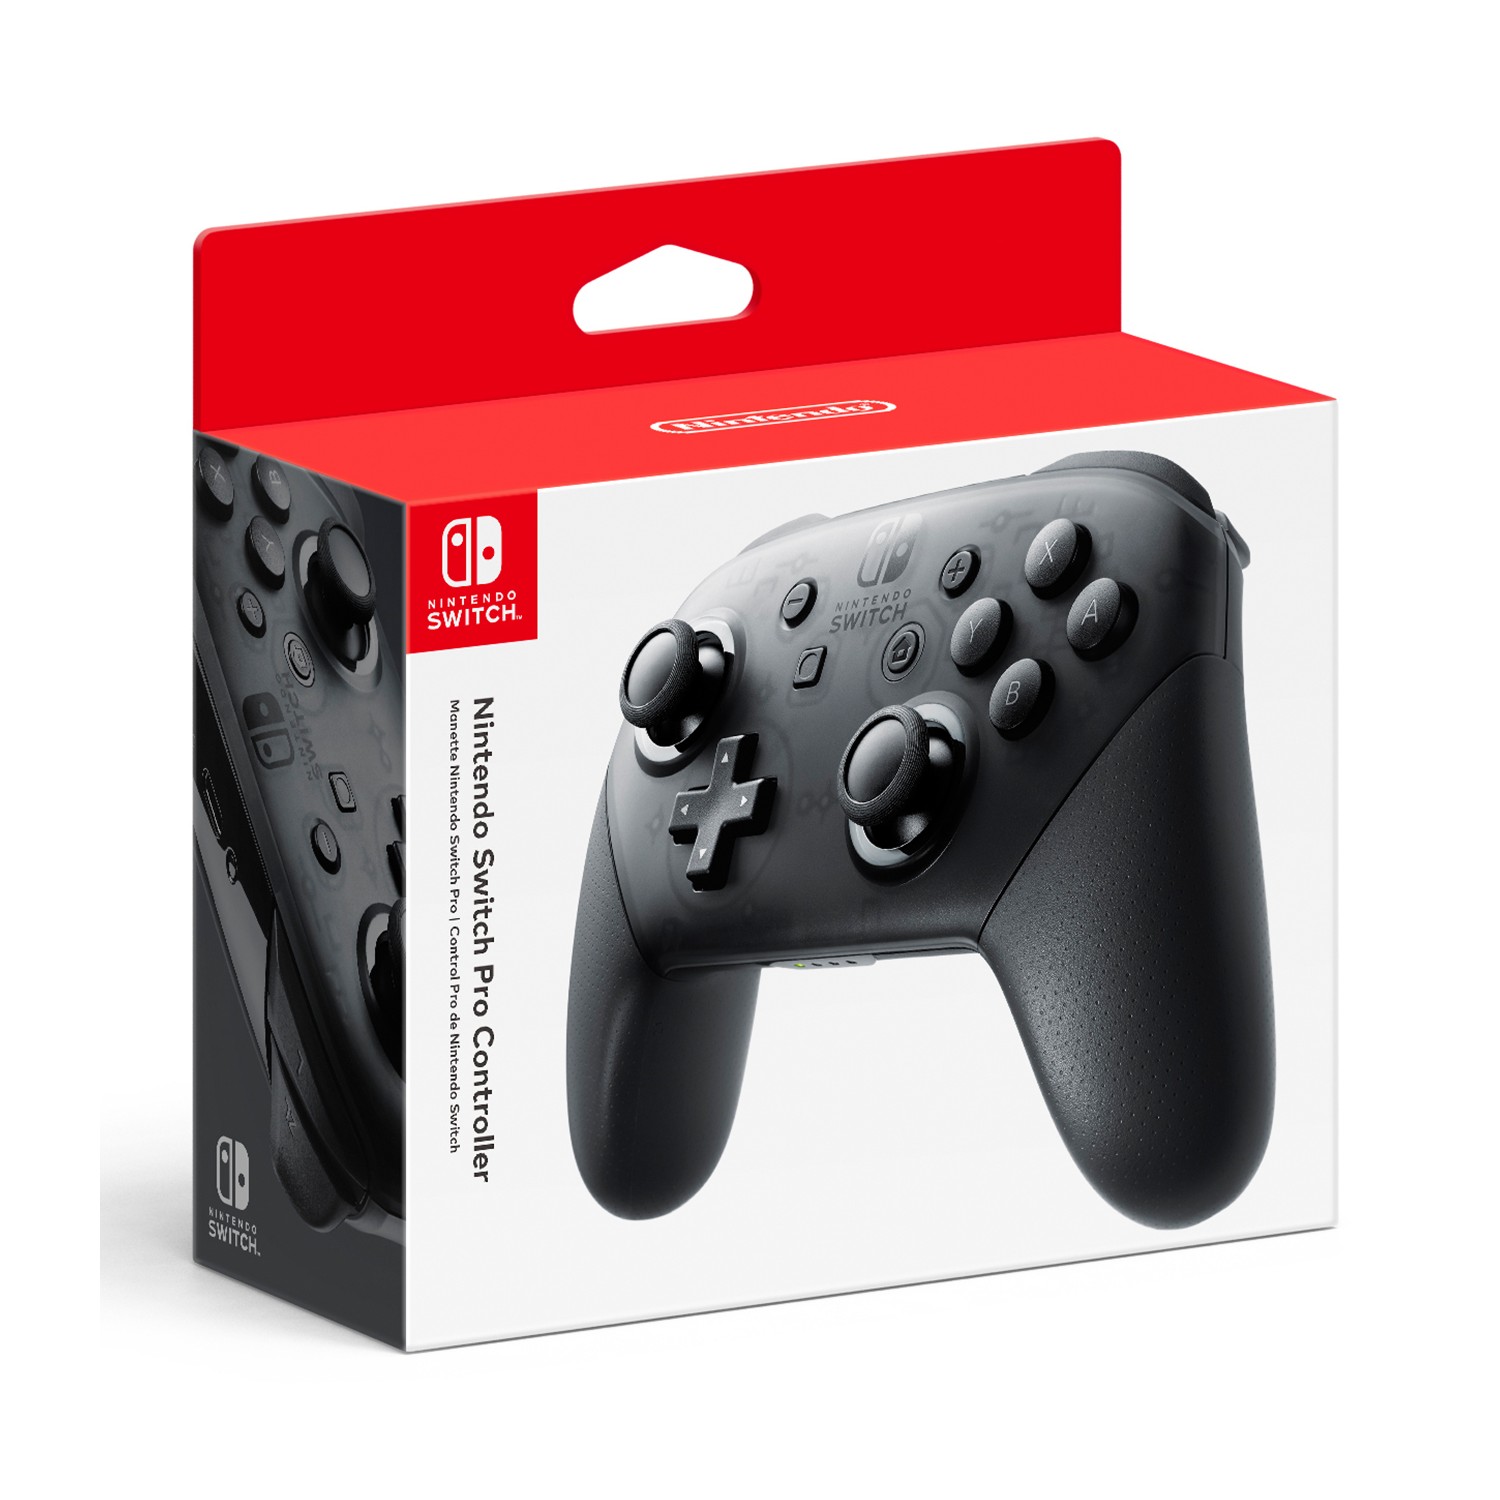 YMMV? Target Circle: 30% off Nintendo Switch and Xbox Controllers. Expires 07/09/22